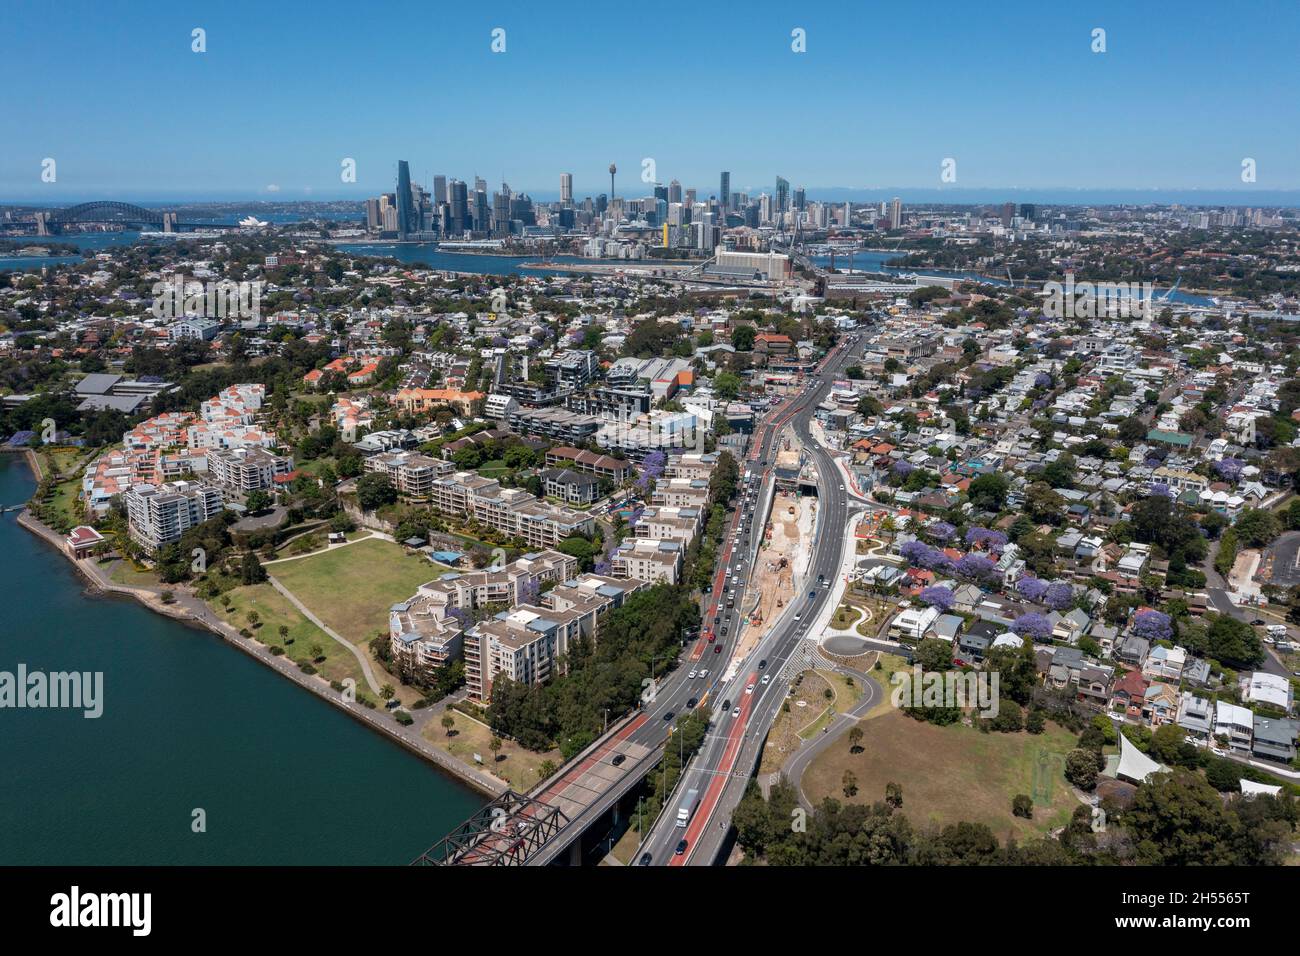 The Sydney suburb of Rozelle and Victoria road heading to the city. Stock Photo